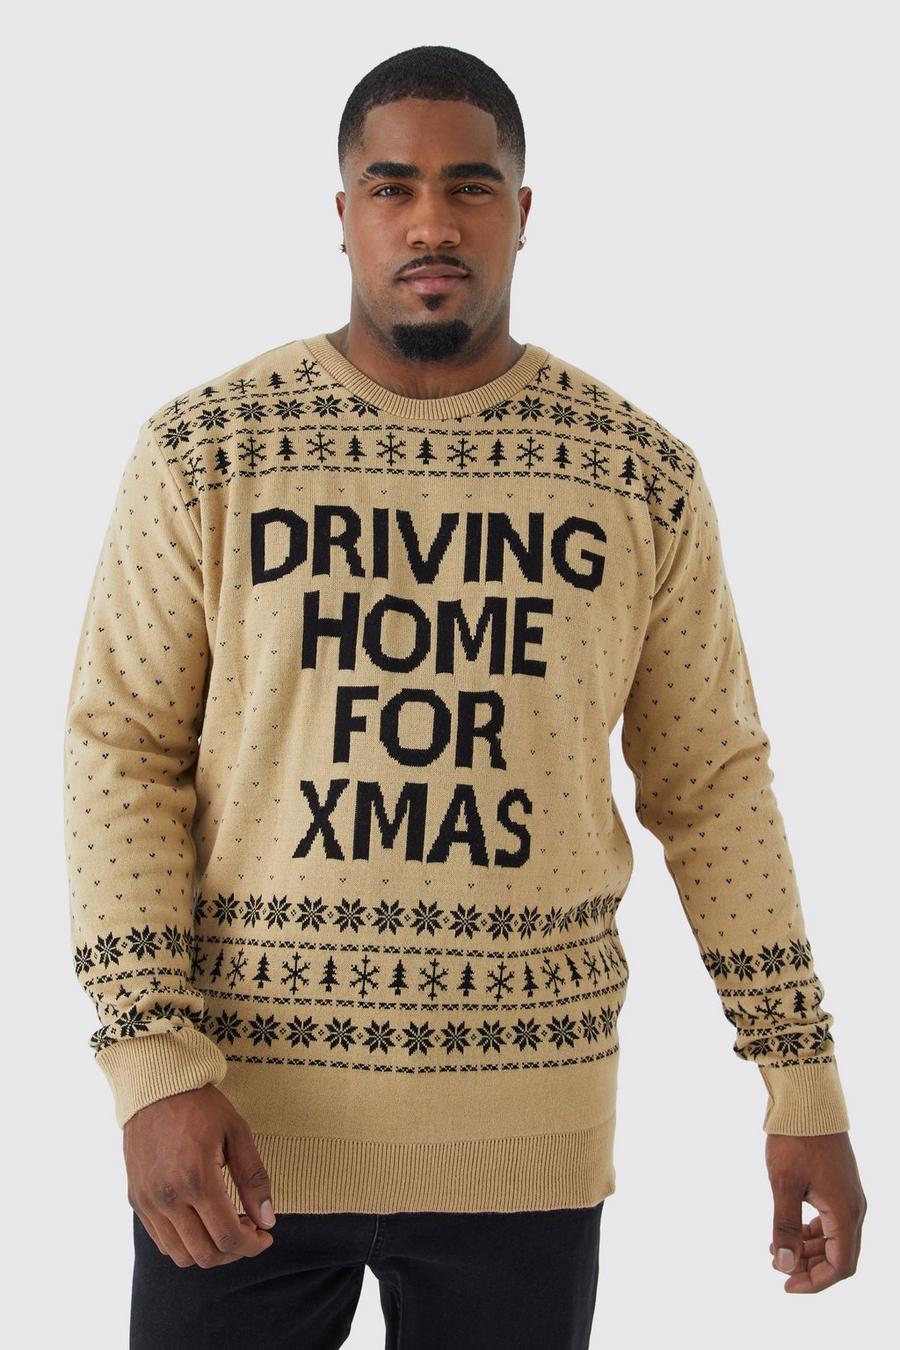 Plus Weihnachtspullover mit Driving Home for Xmas Print, Ecru